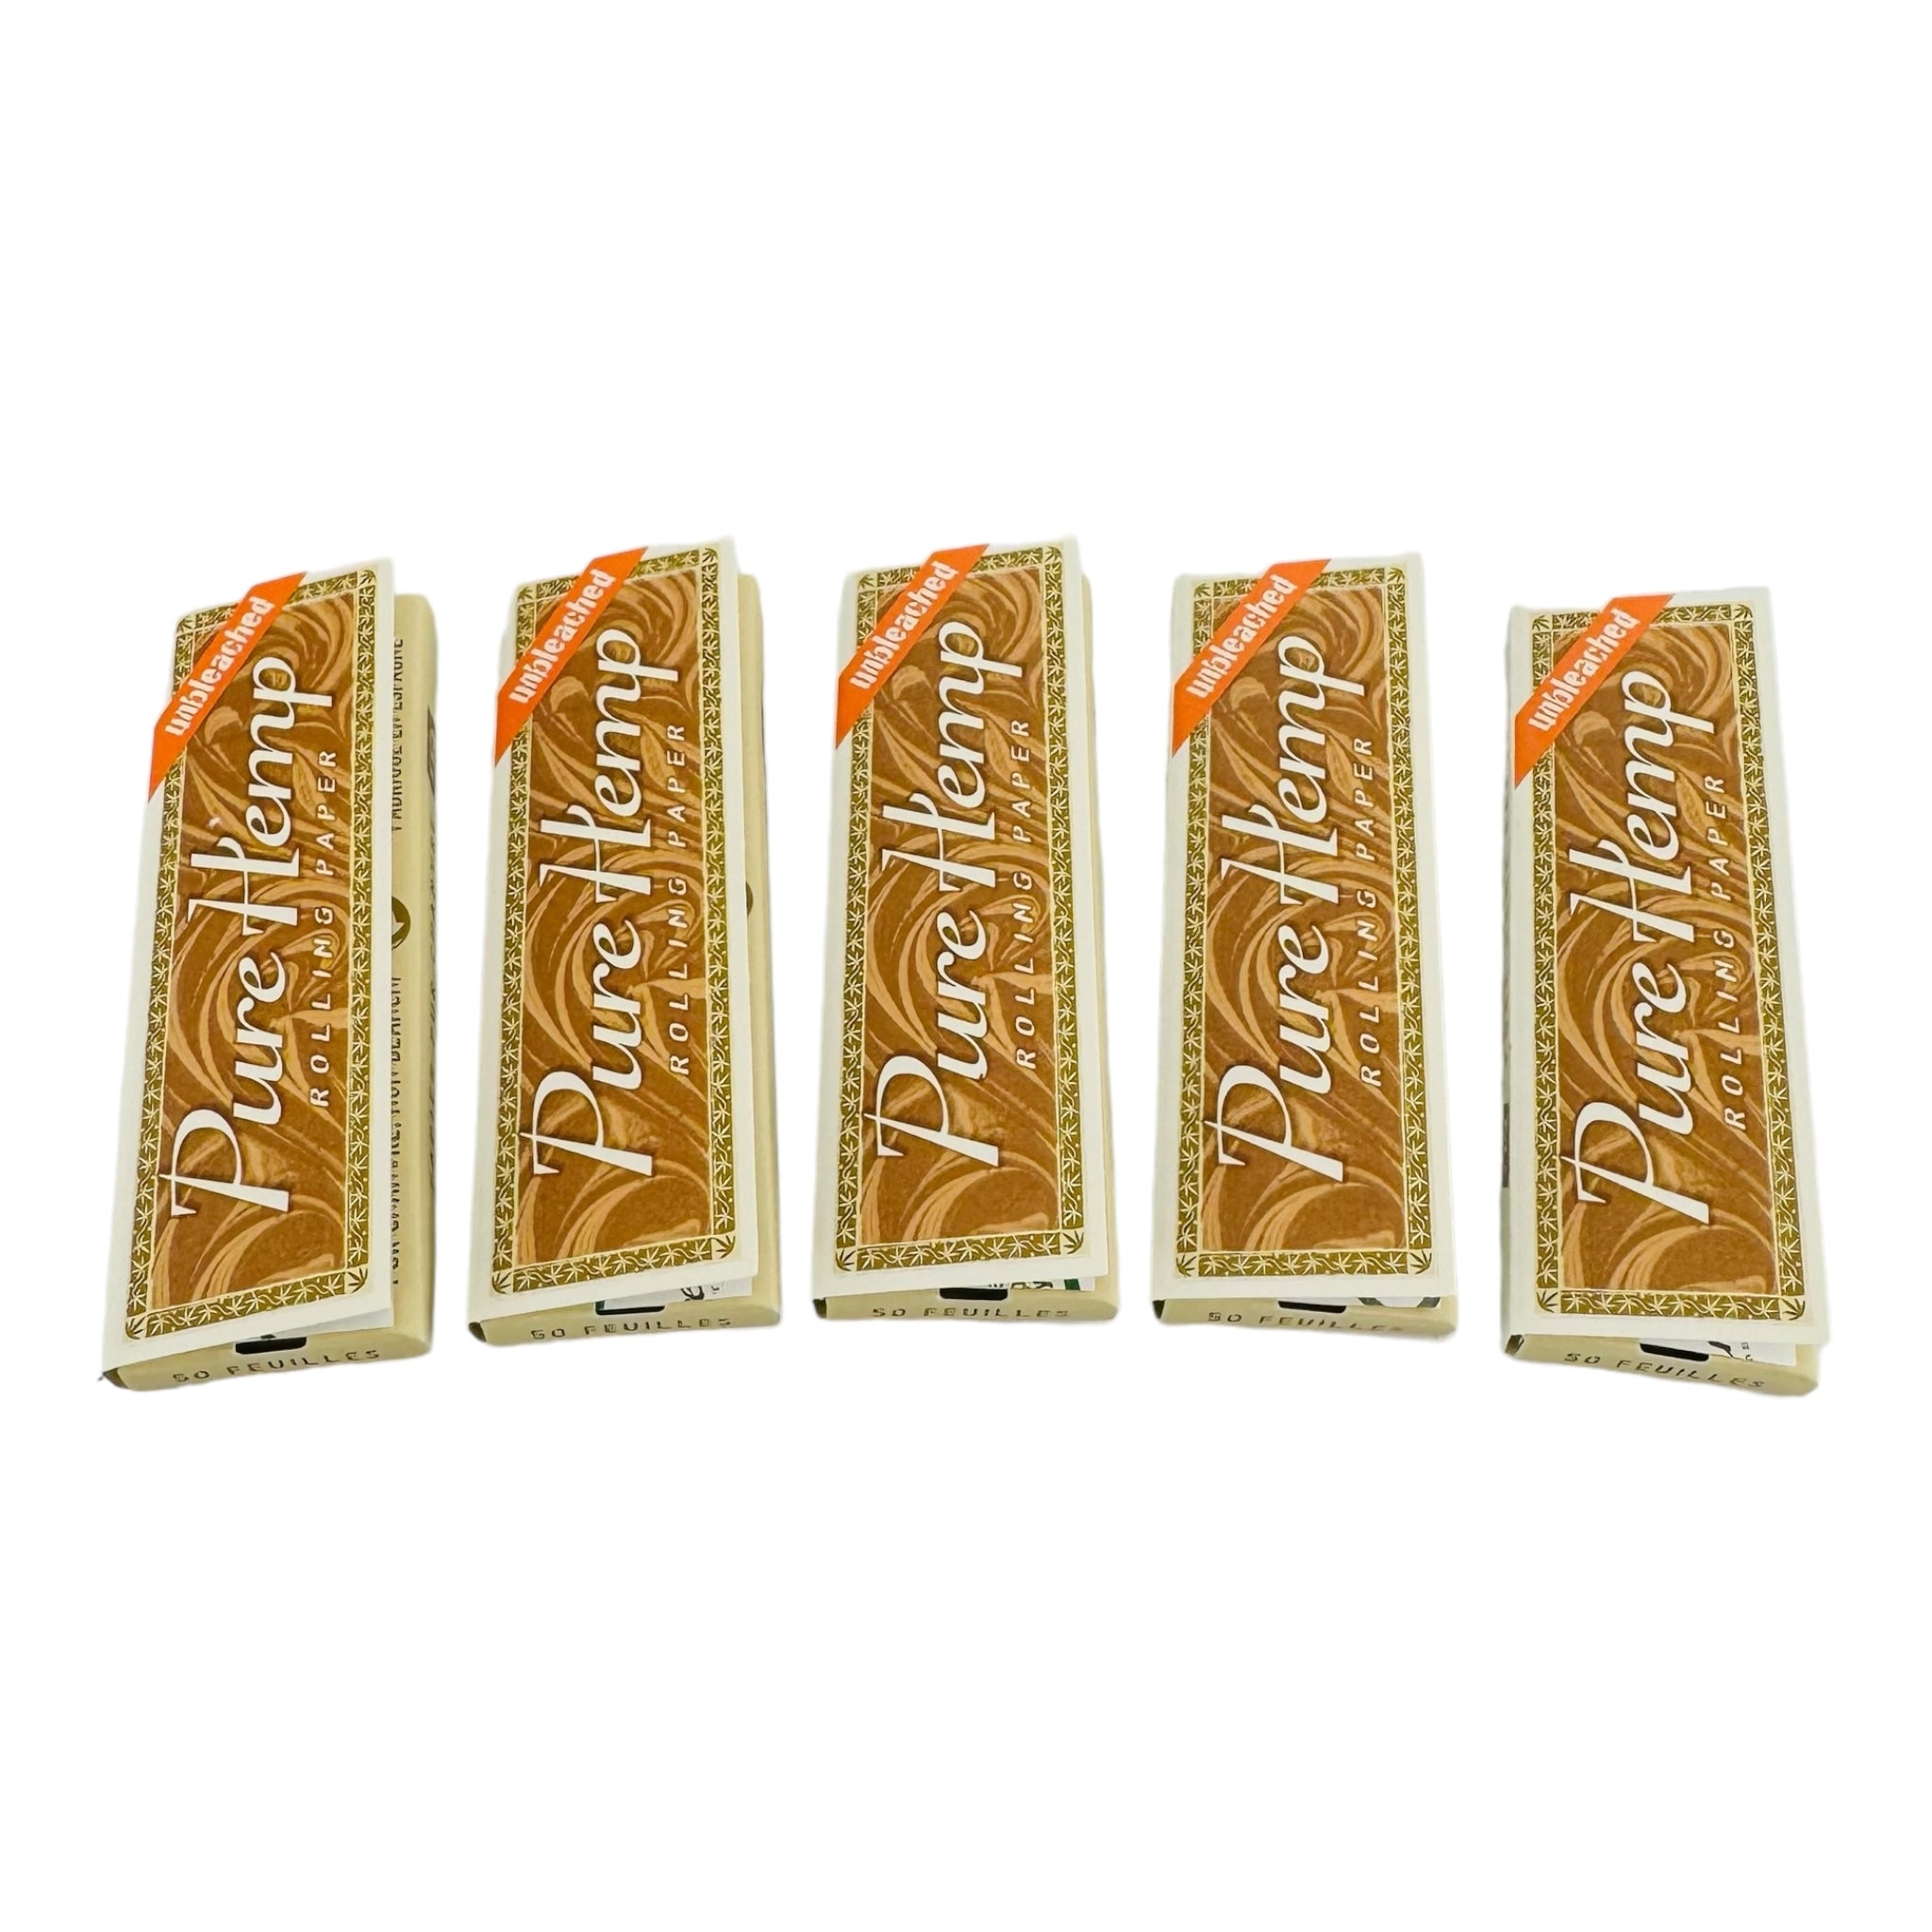 Pure Hemp Unbleached 1-1/4" Rolling Papers 5 individual Packs for sale